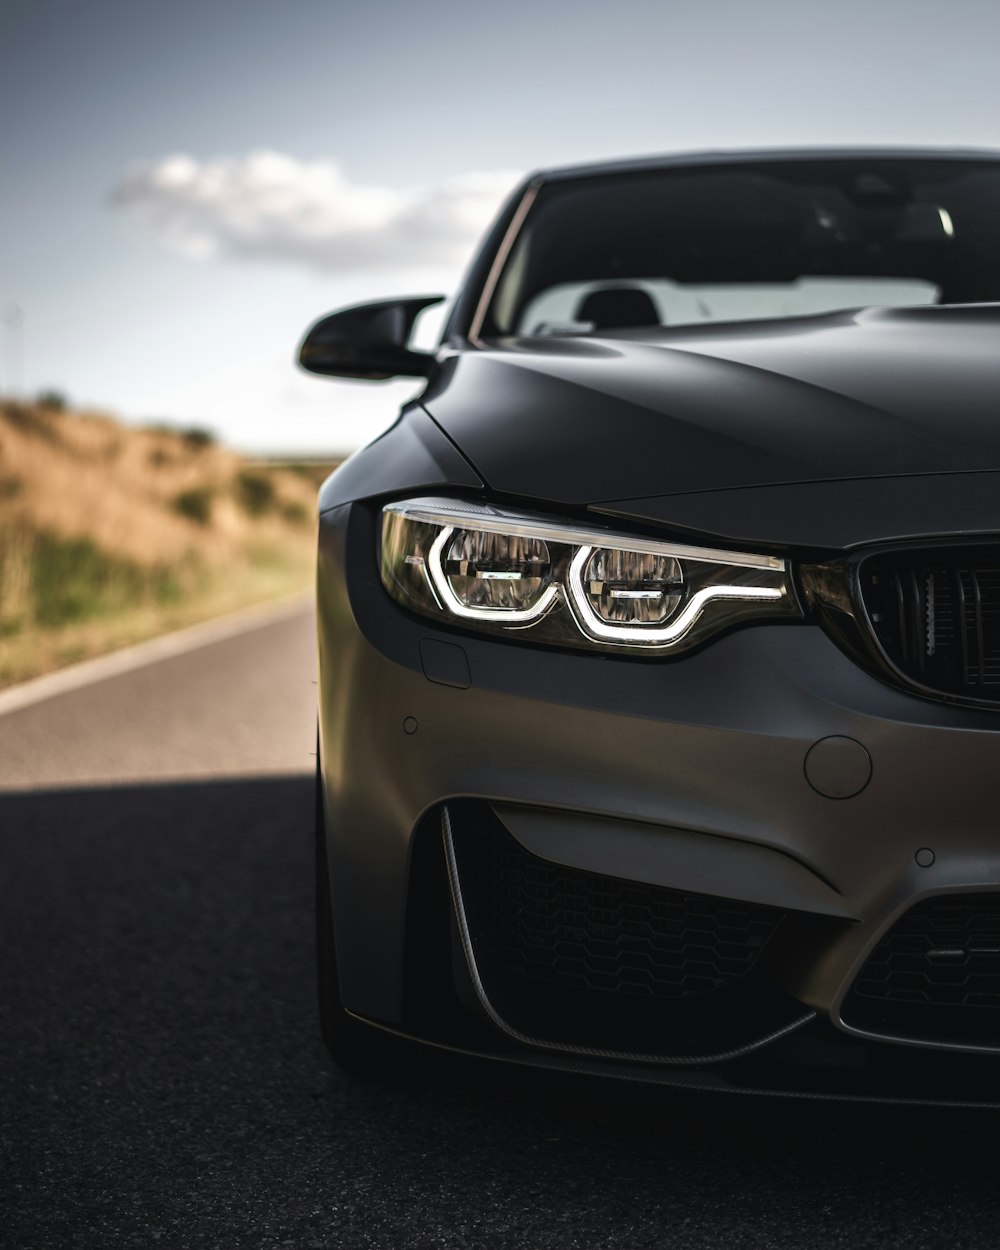 Bmw M4 Pictures [Hd] | Download Free Images On Unsplash